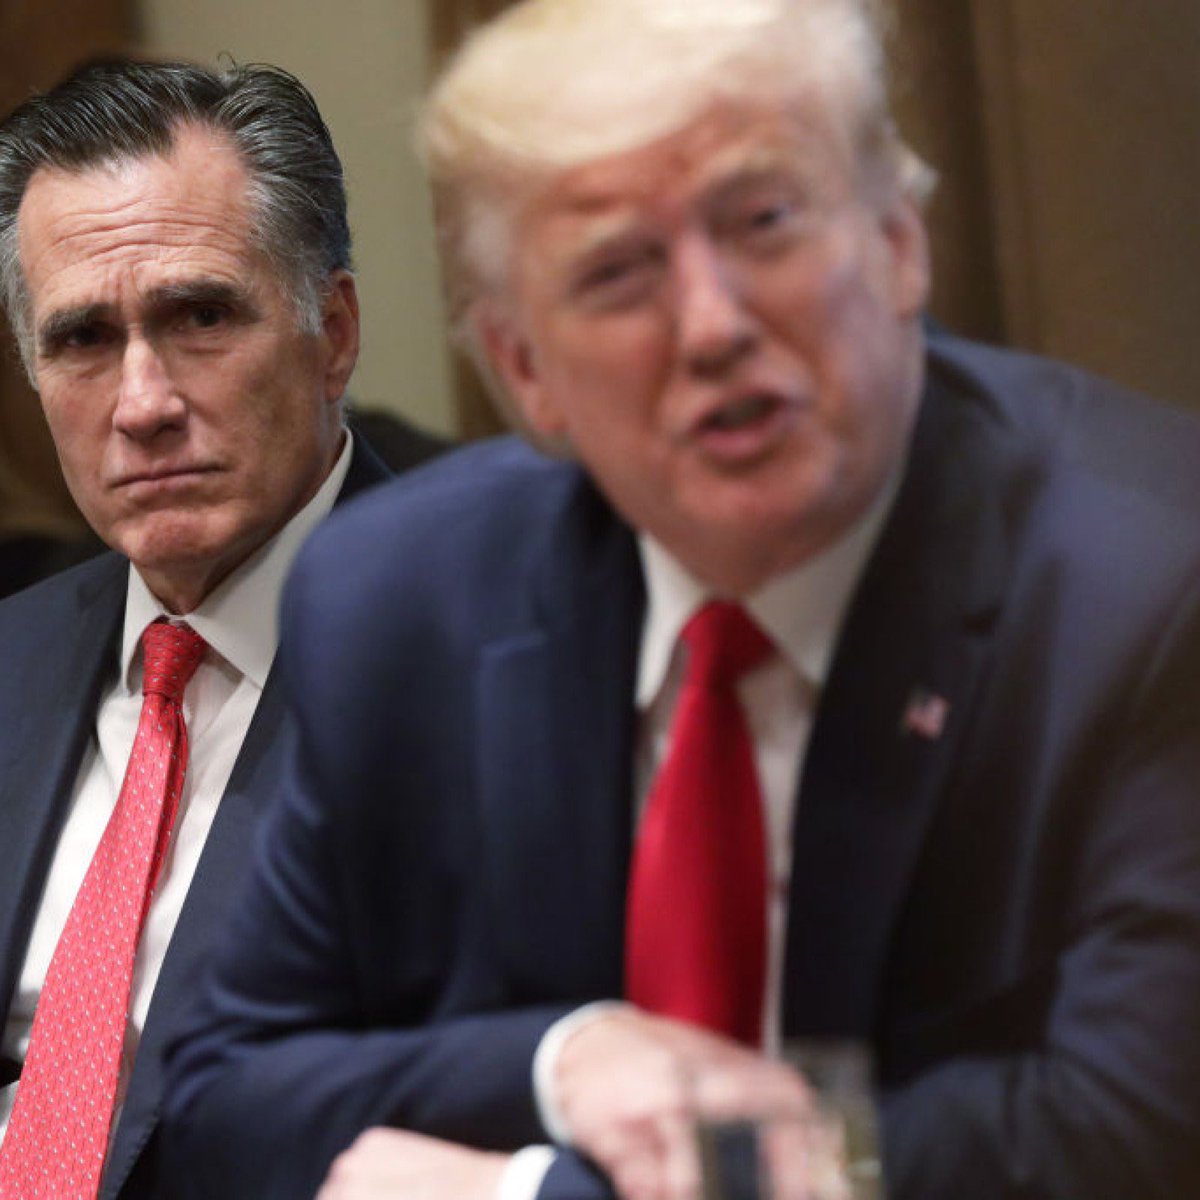 Mitt Romney on Trump (2016): “He is unquestionably mentally unstable, and he is racist, bigoted, misogynistic, xenophobic, vulgar and prone to violence. There is simply no rational argument that could lead me to vote for someone with those characteristics.”